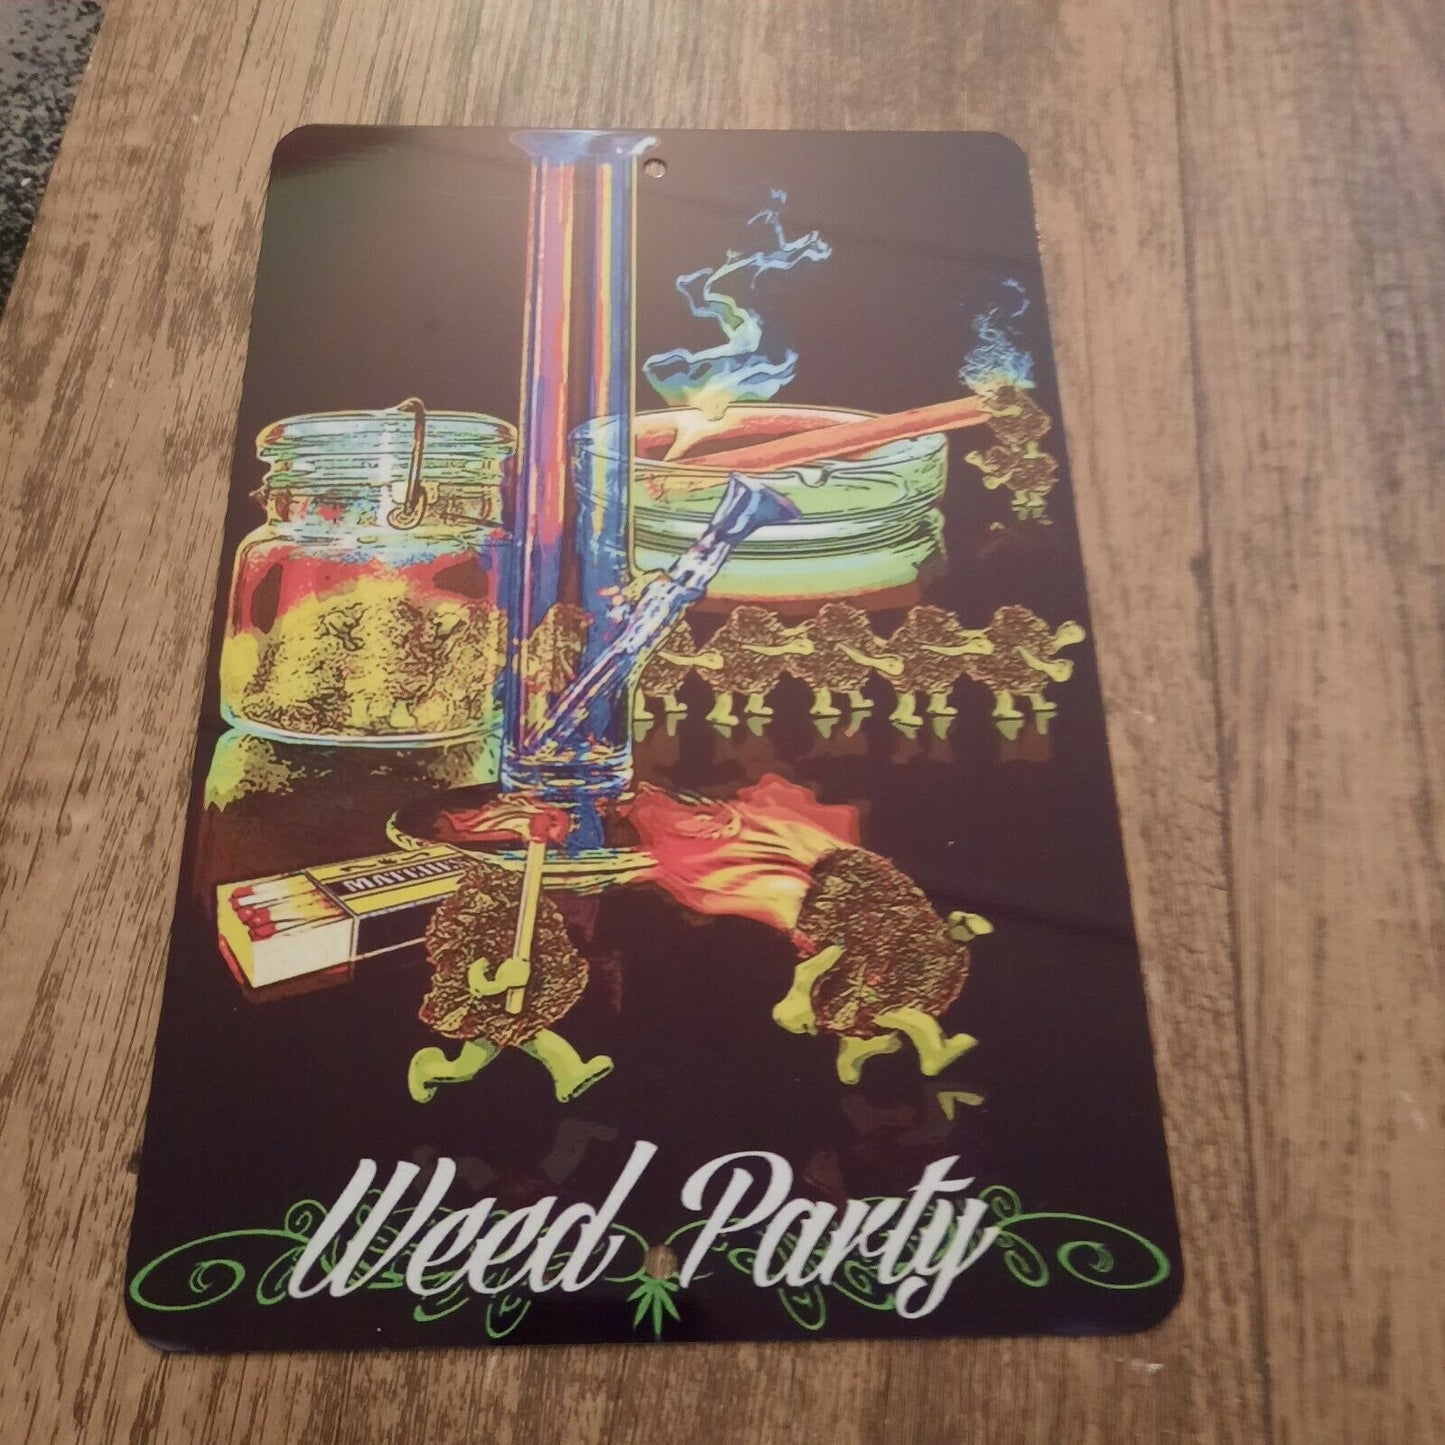 Weed Party 8x12 Metal Wall Sign Poster 420 Mary Jane Ganja Bongs